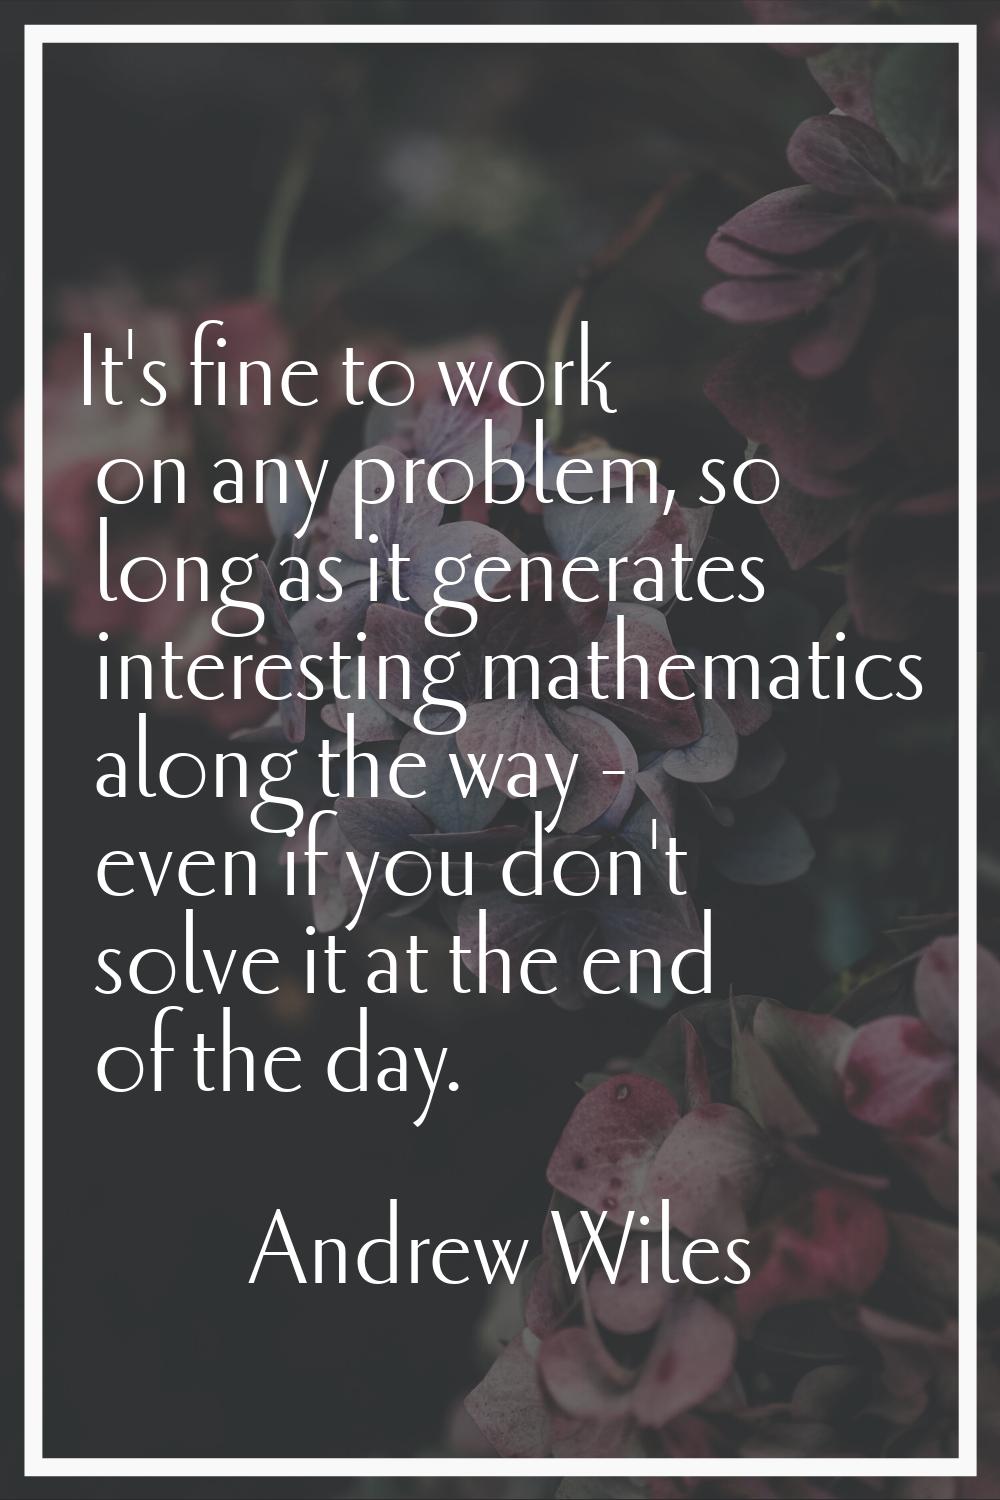 It's fine to work on any problem, so long as it generates interesting mathematics along the way - e